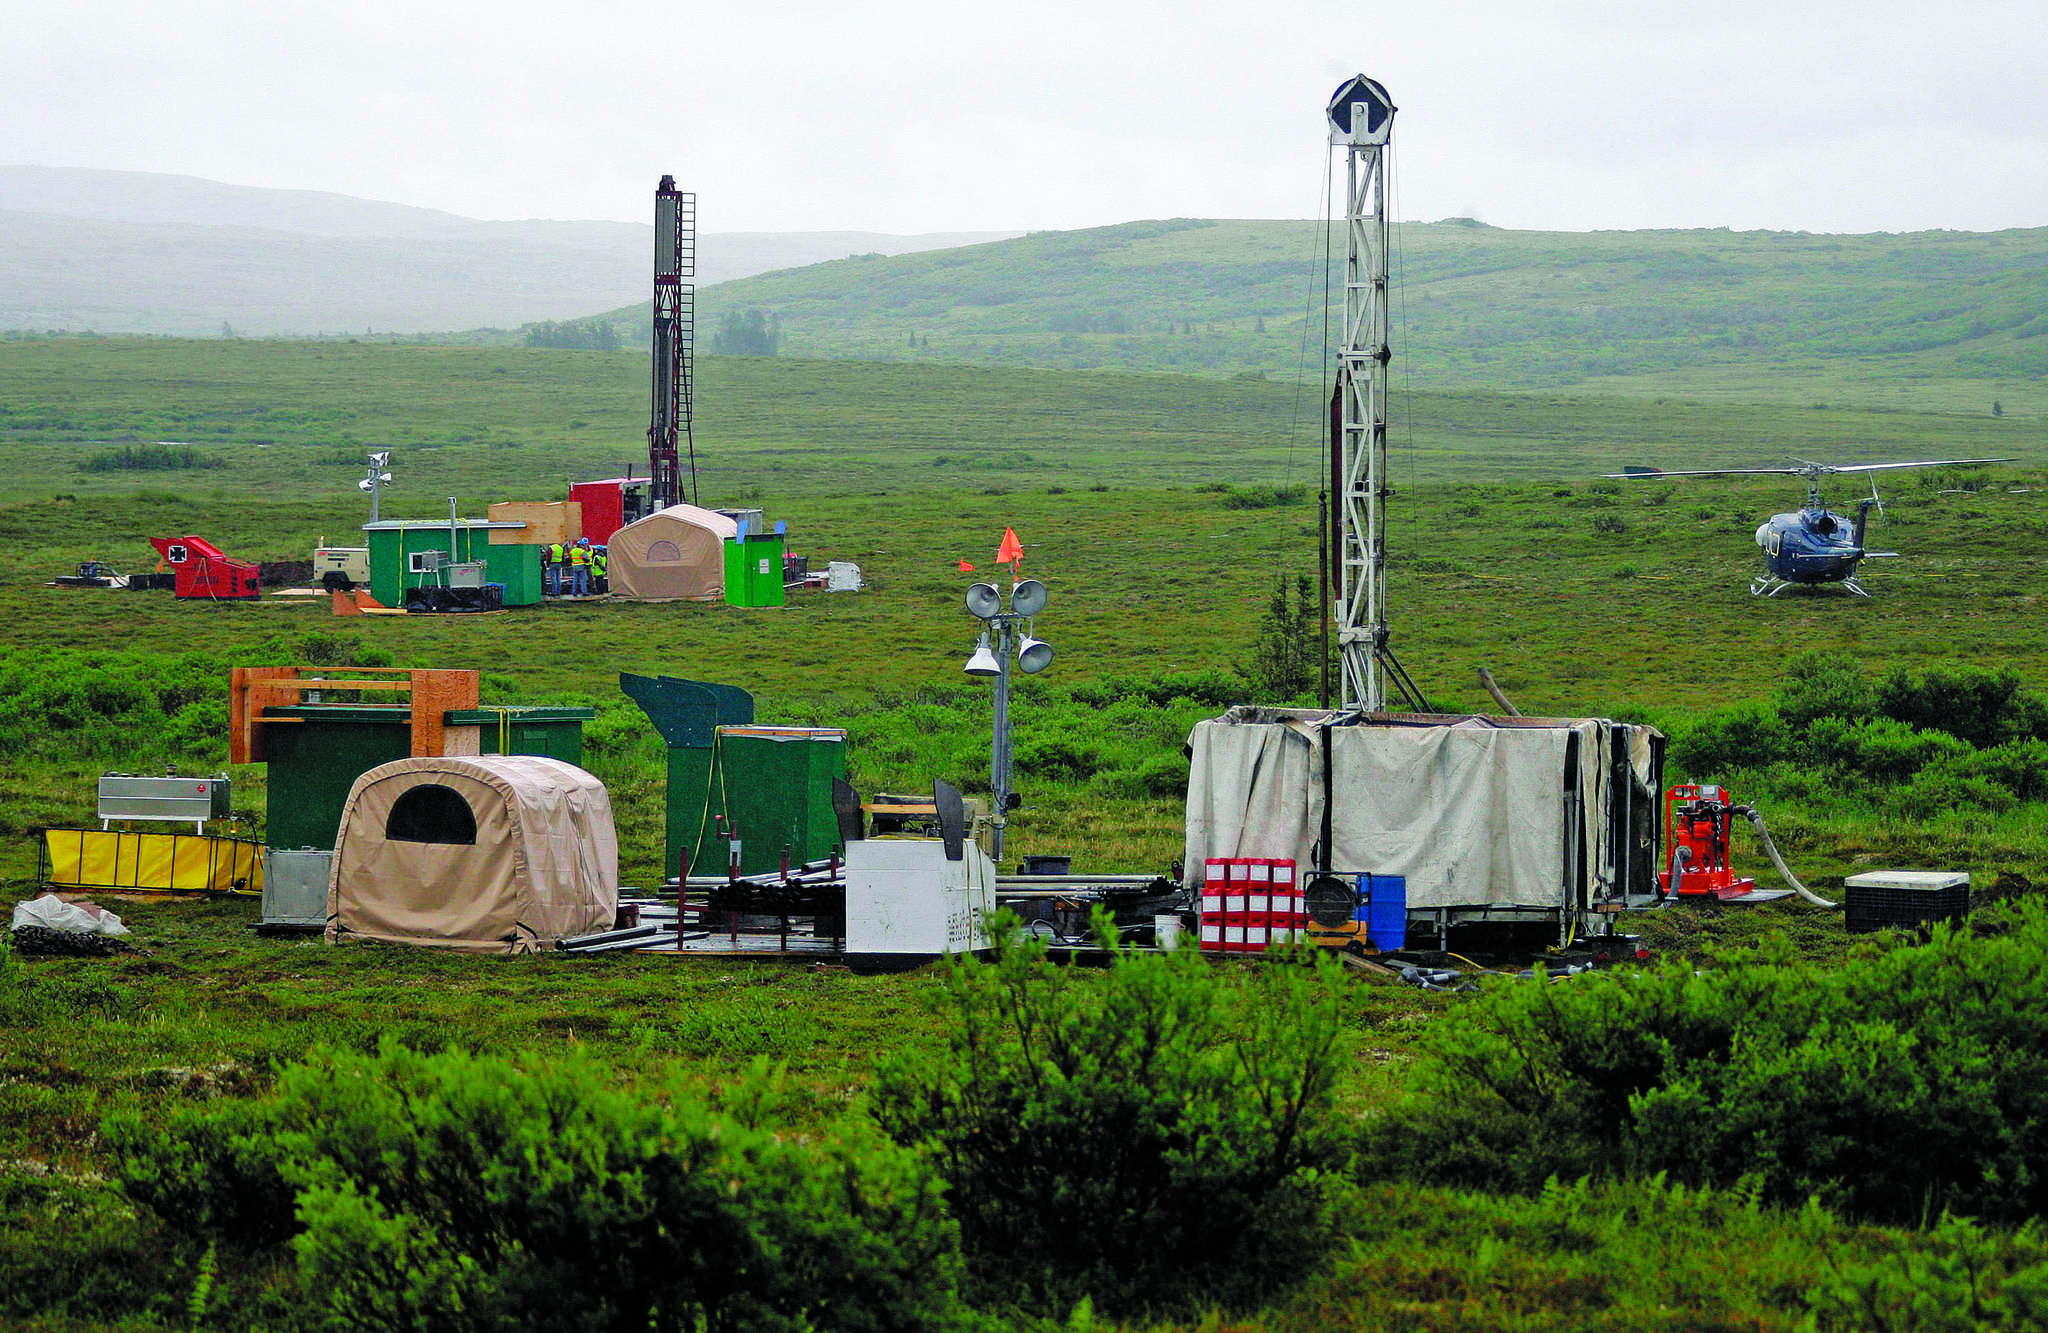 In this July 13, 2007, file photo, workers with the Pebble Mine project test drill in the Bristol Bay region of Alaska, near the village of Iliamma. The Pebble Limited Partnership, which wants to build a copper and gold mine near the headwaters of a major U.S. salmon fishery in southwest Alaska, says it plans to offer residents in the region a dividend. (AP Photo/Al Grillo, File)